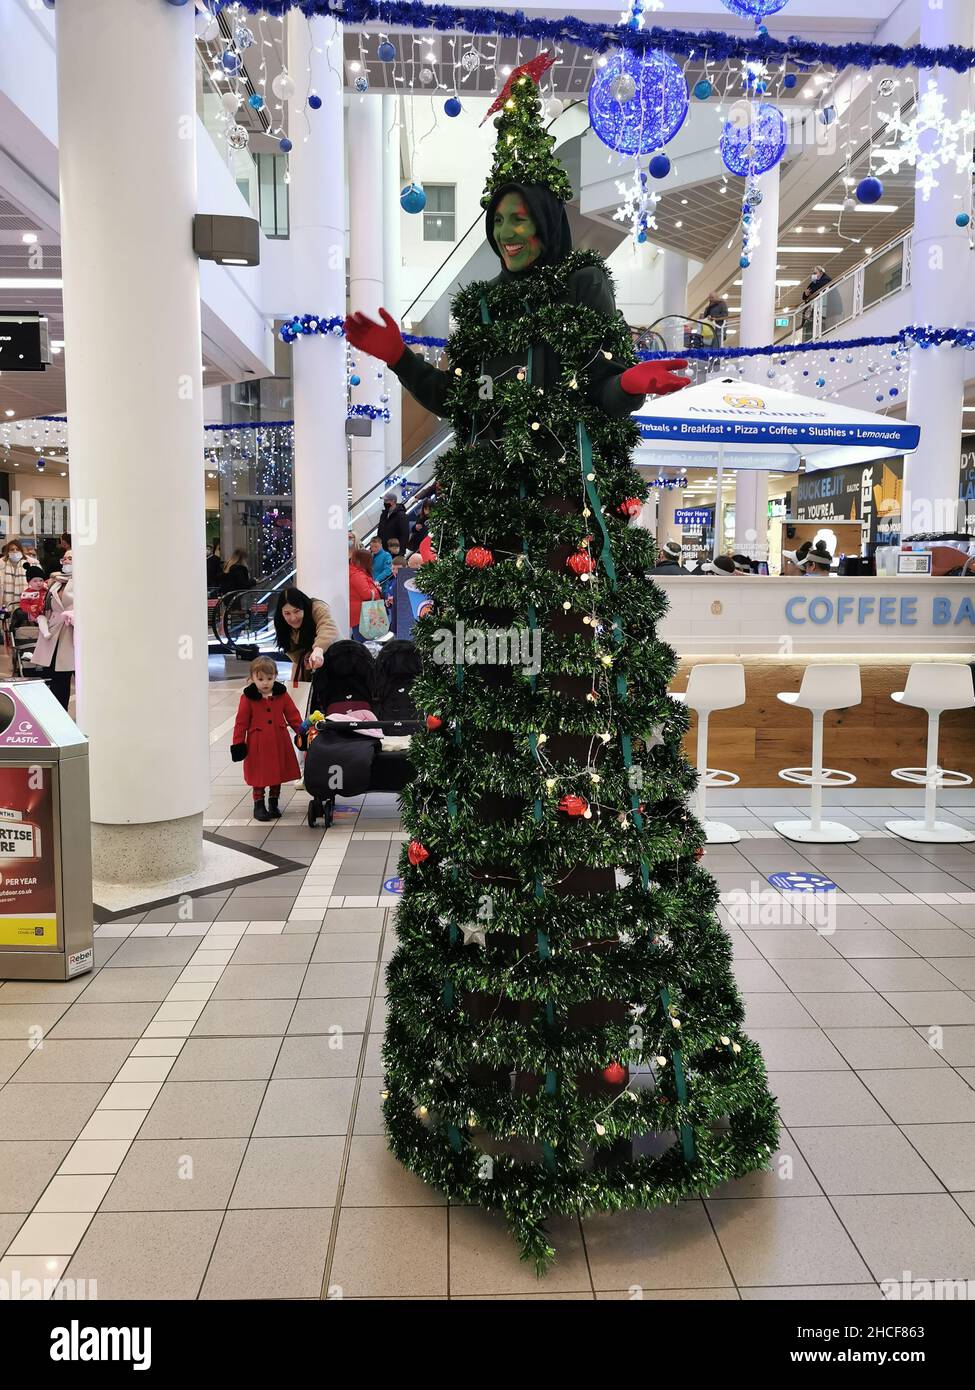 A vertical shot of a lady dressed up like a Christmas tree on stilts entertaining children in Belfast, UK Stock Photo